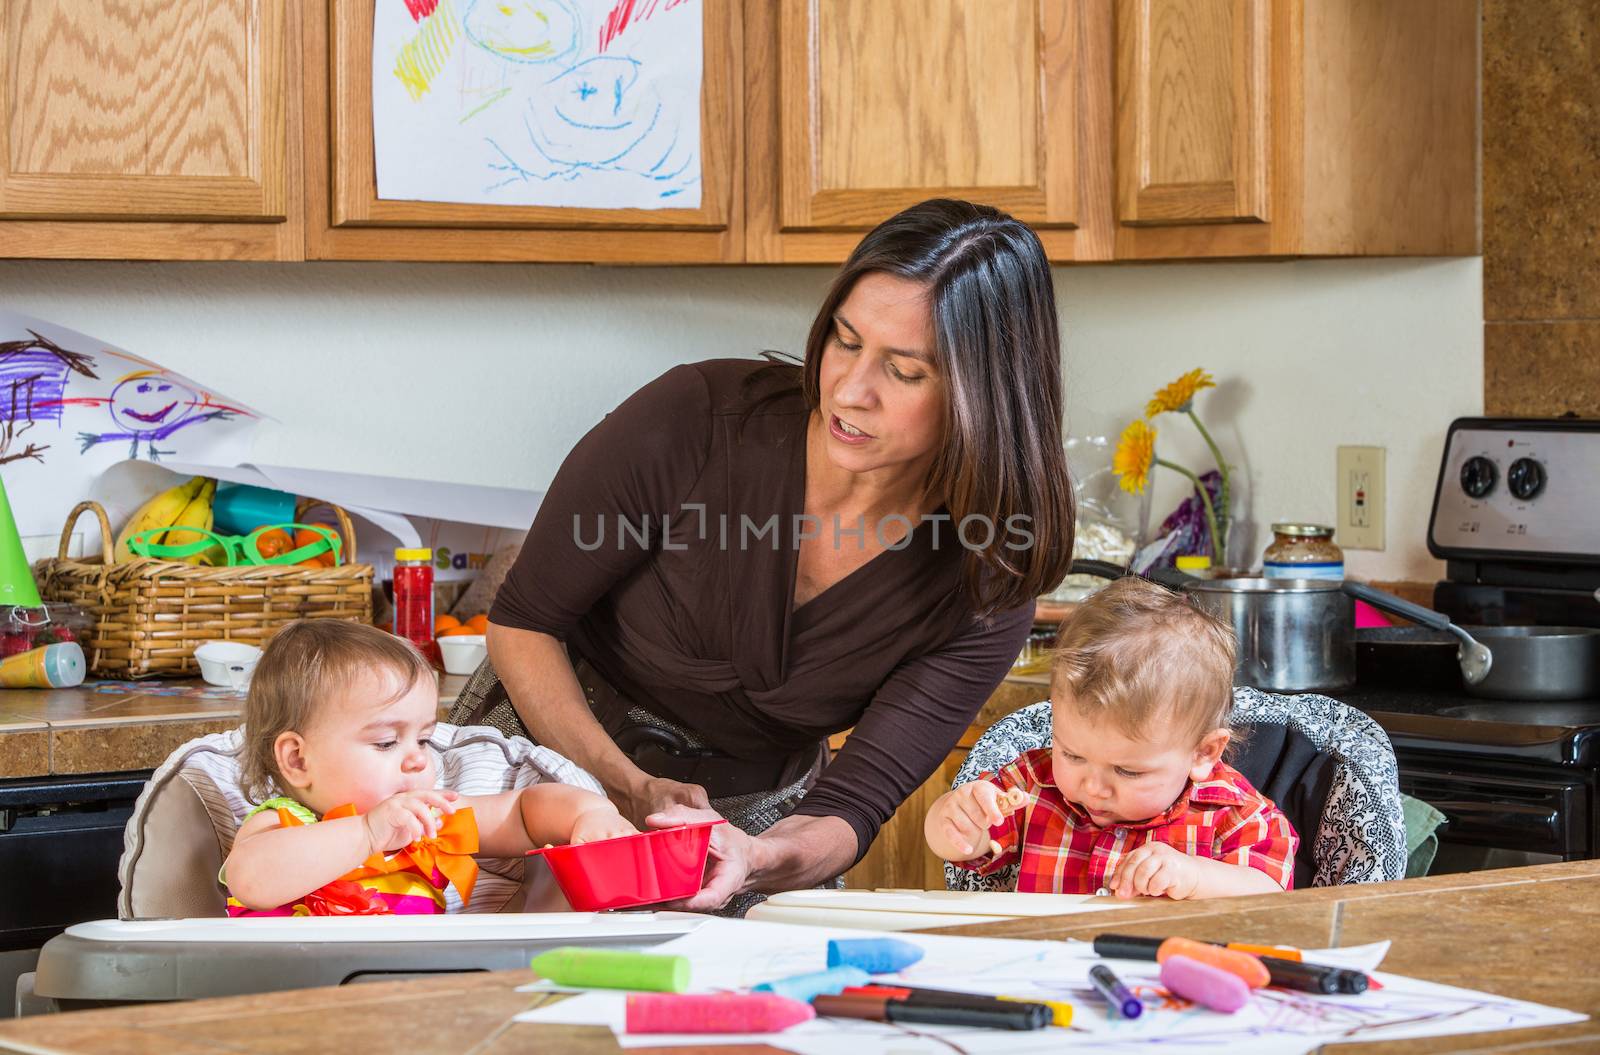 A mother in the kitchen feeds babies breakfast